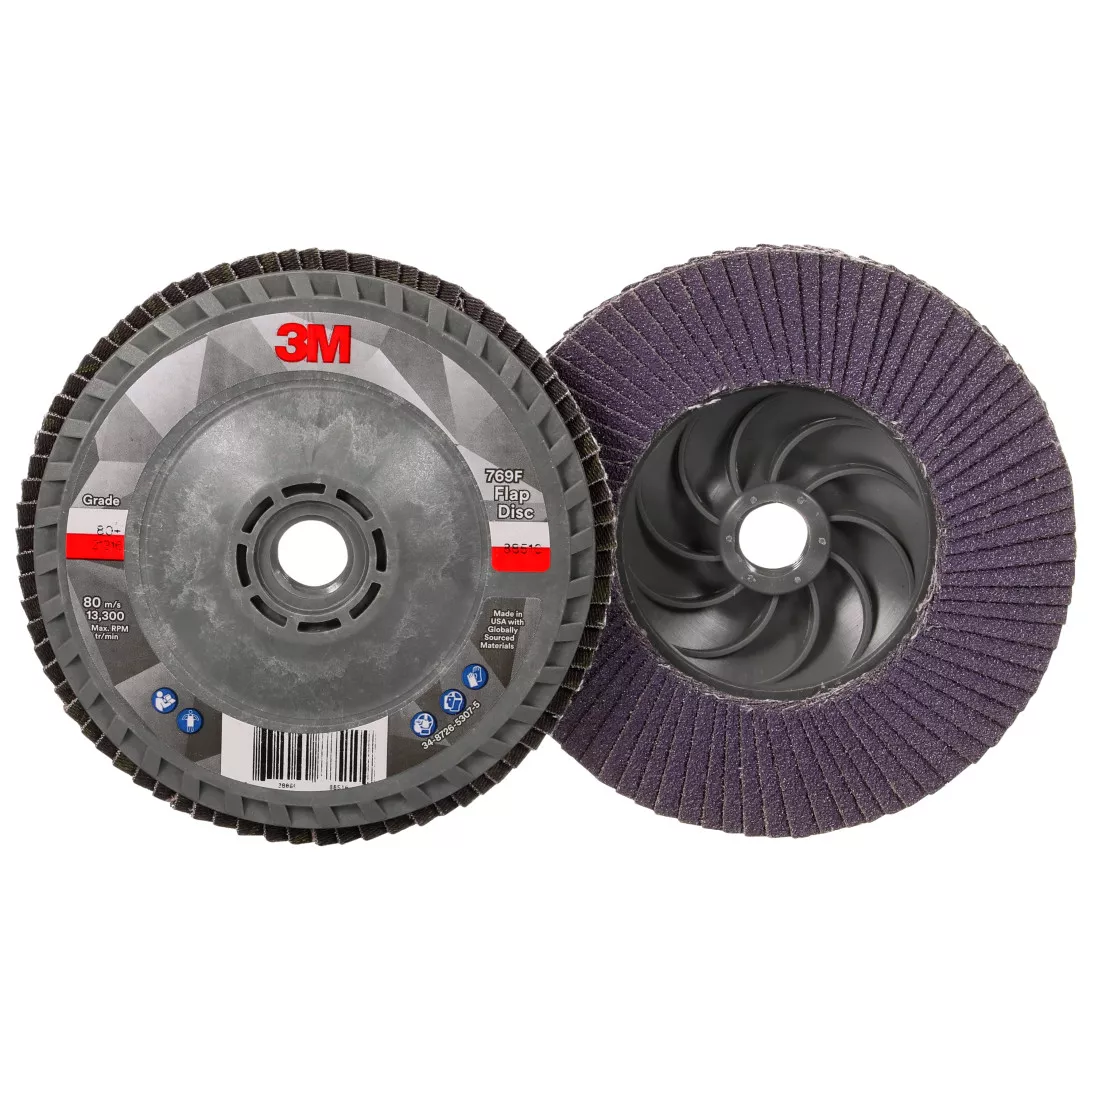 3M™ Flap Disc 769F, 80+, Quick Change, Type 27, 4-1/2 in x 5/8 in-11, 10
ea/Case